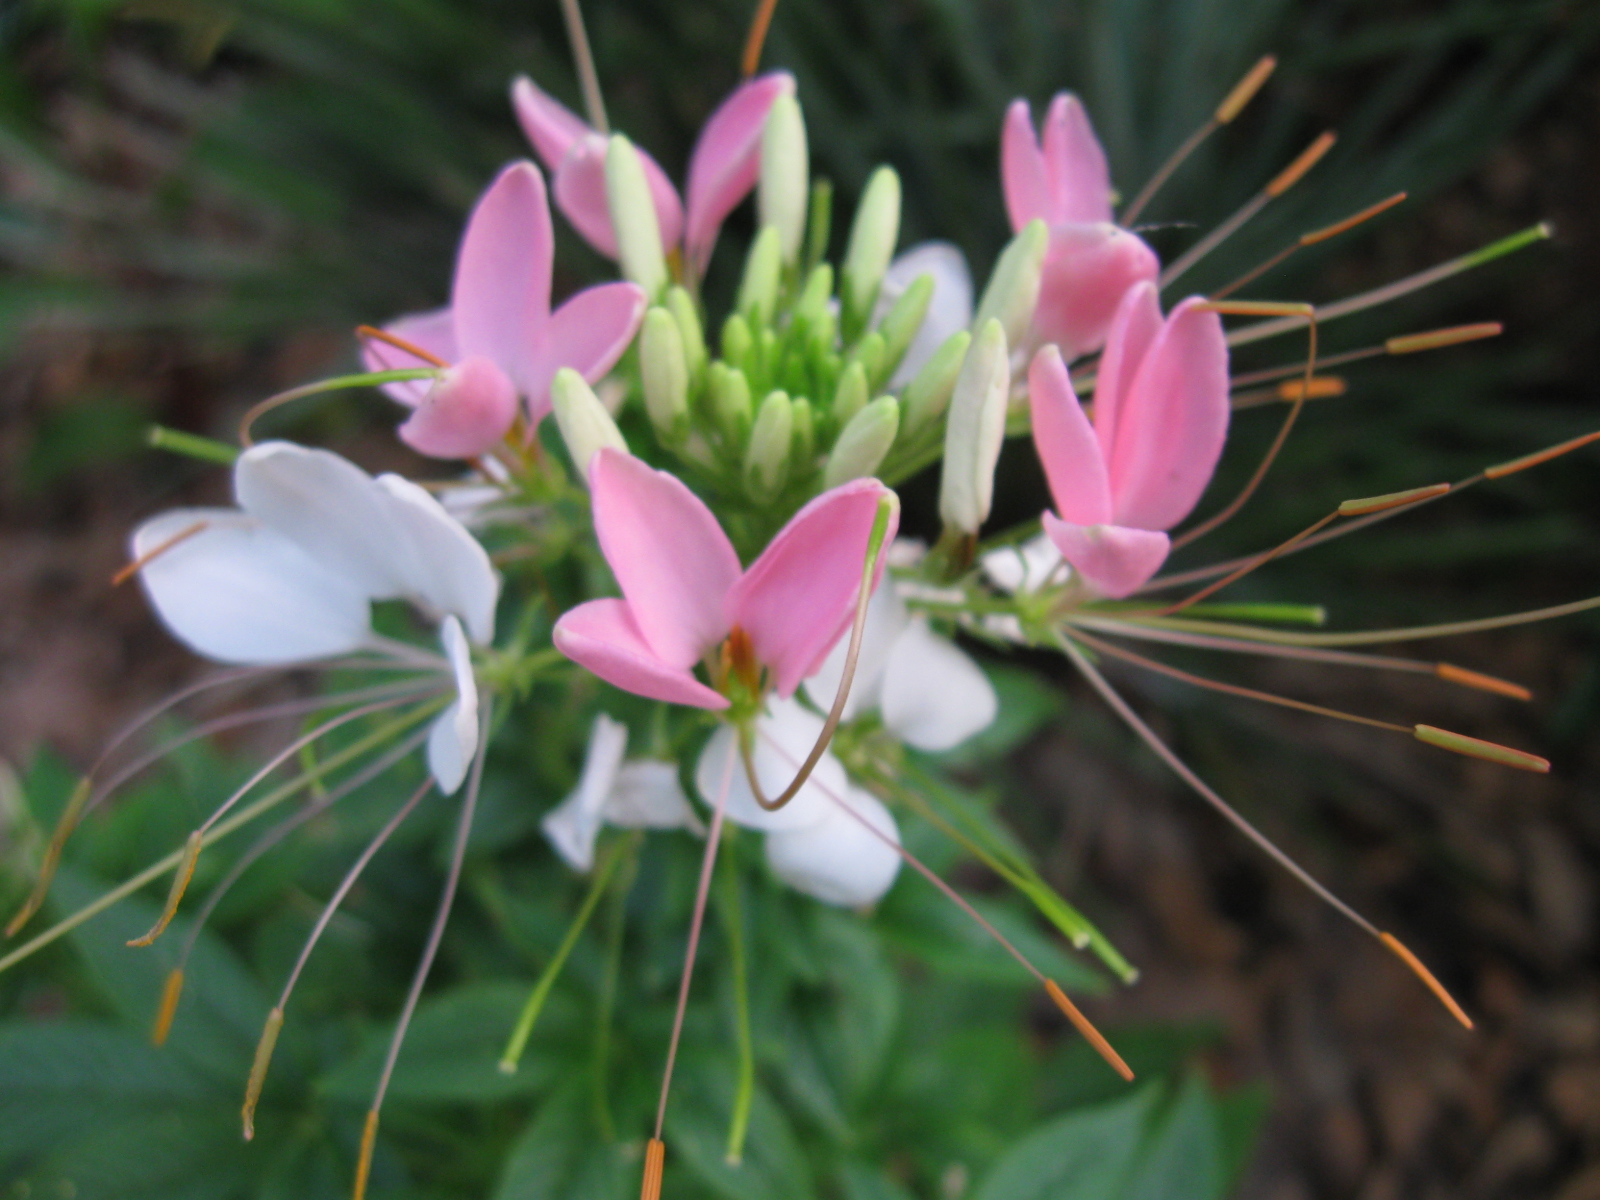 The blooms are a favorite nectar source for hummingbirds, butterflies, bees, and other insects. Plant Cleome in your garden to enjoy the colorful blooms and attract visitors to your yard this year!